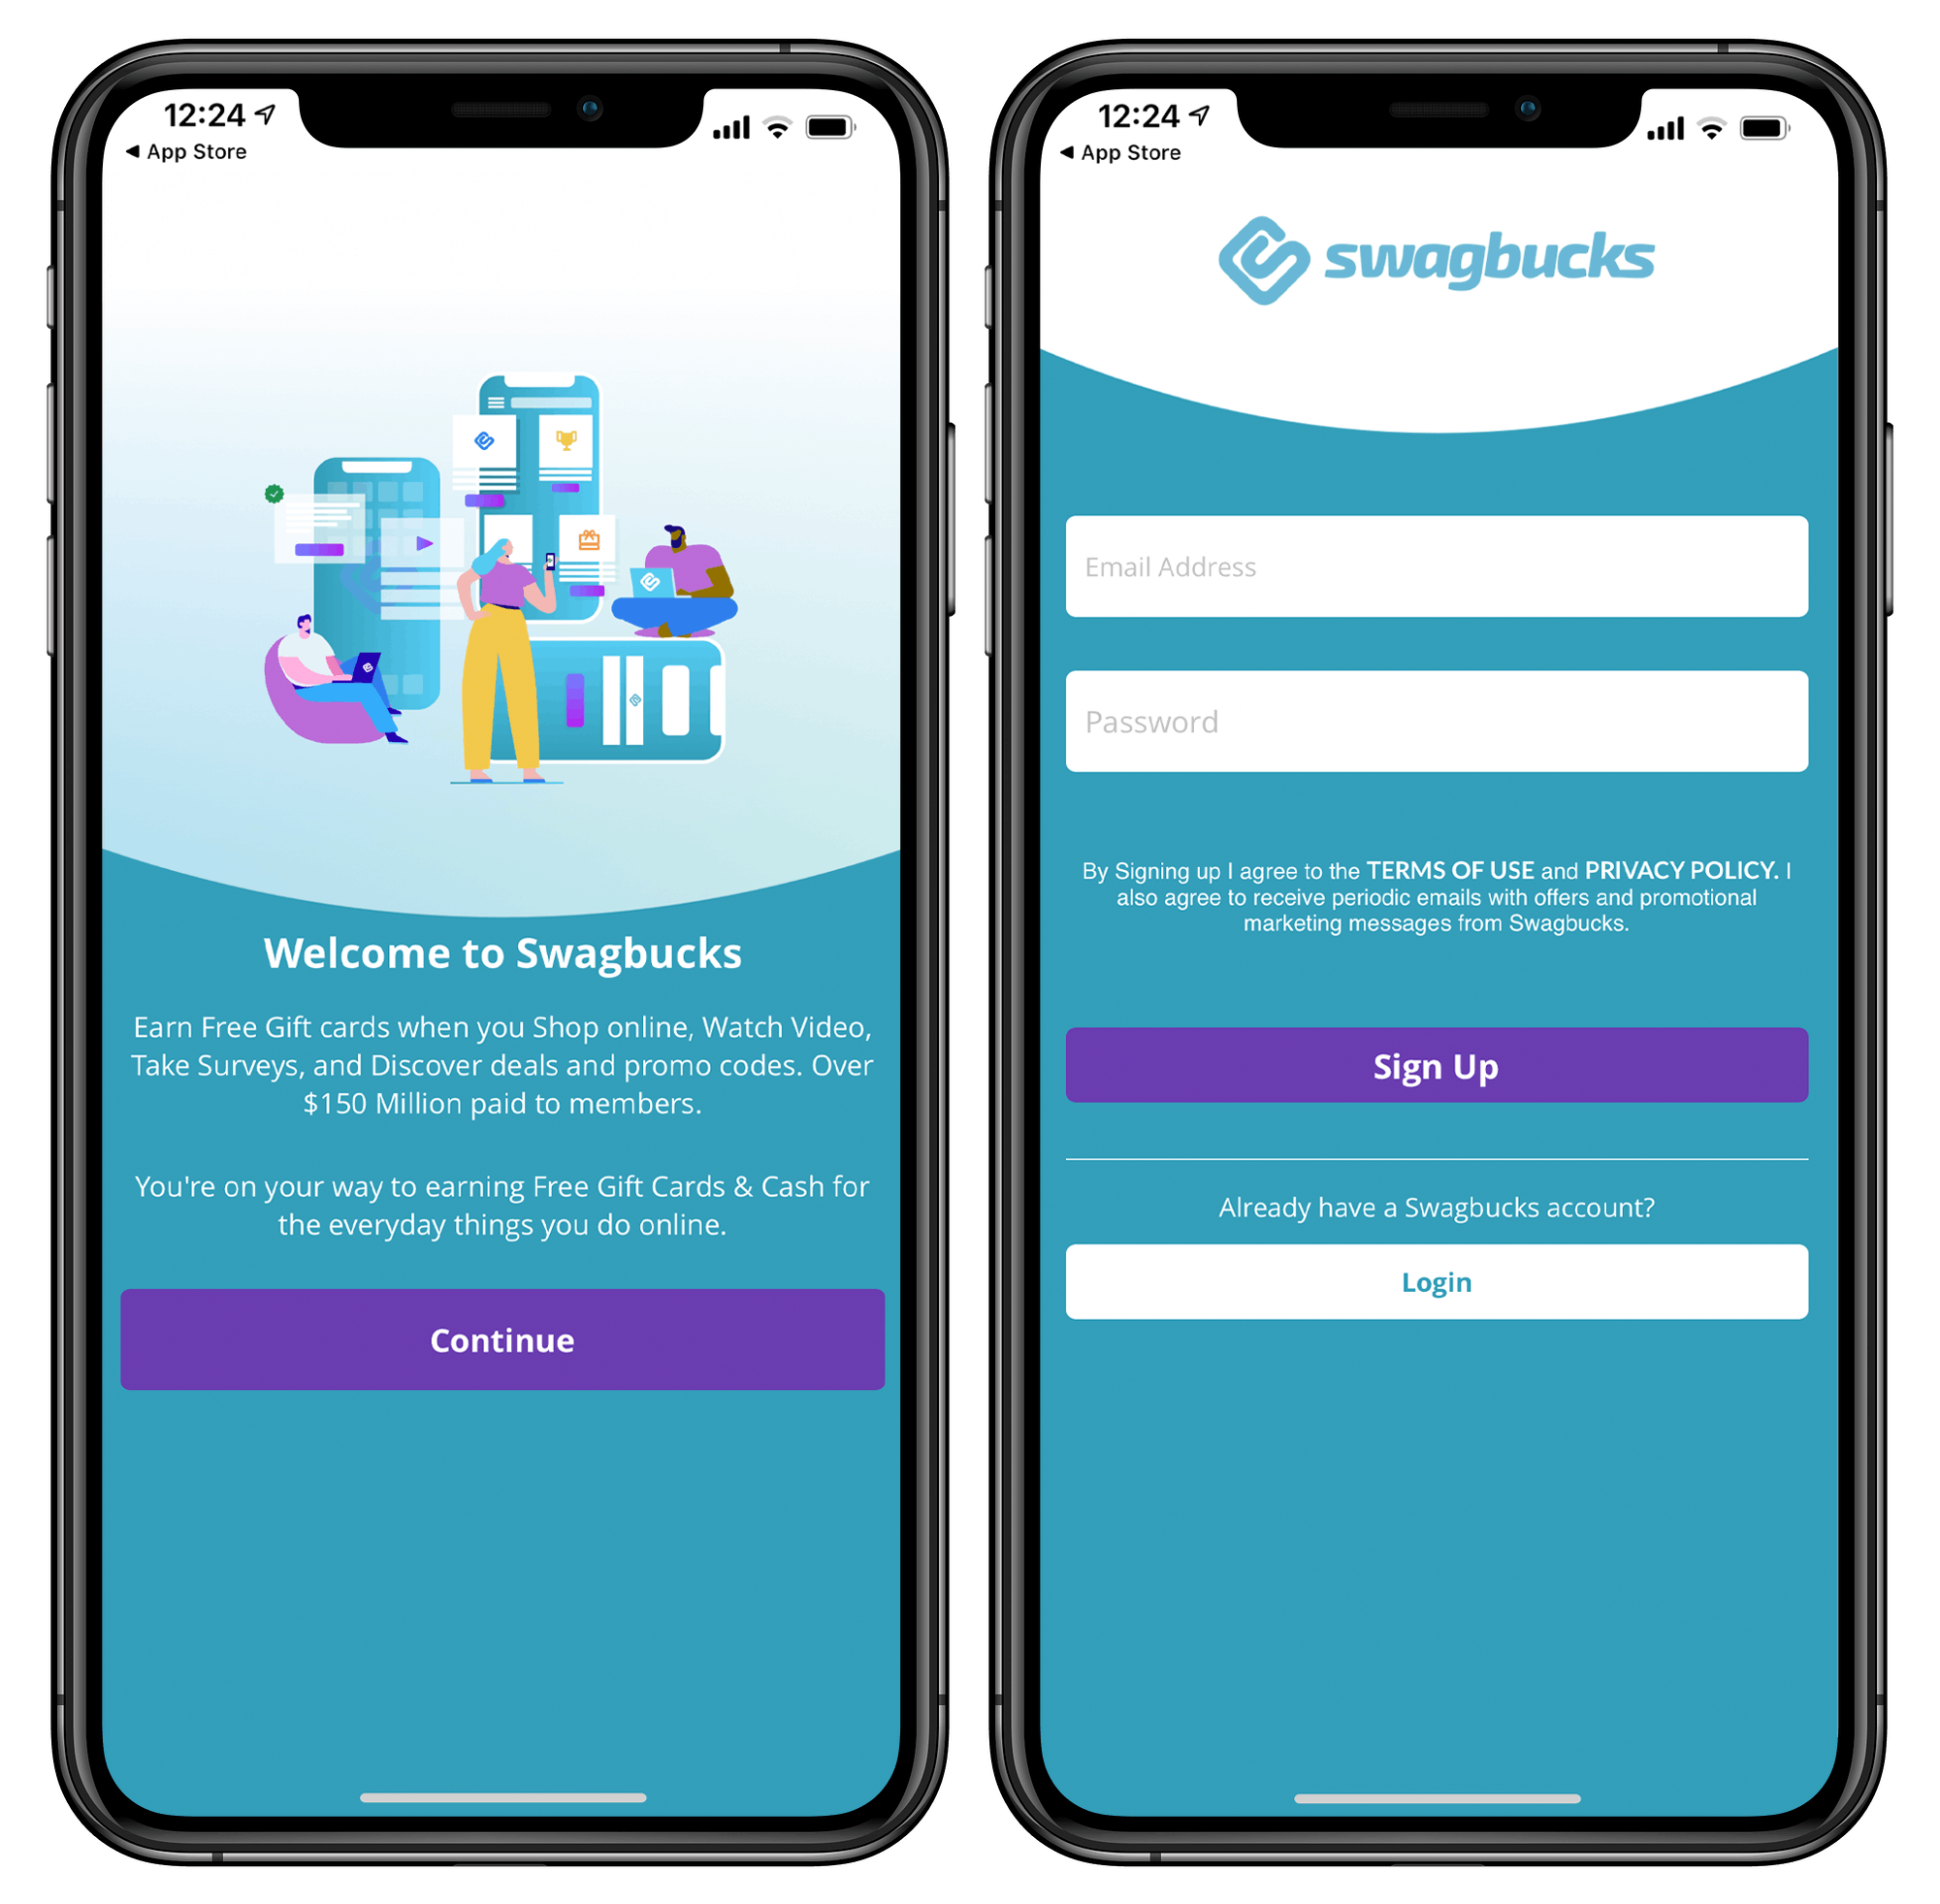 The welcome page and sign up page in the Swagbucks app.